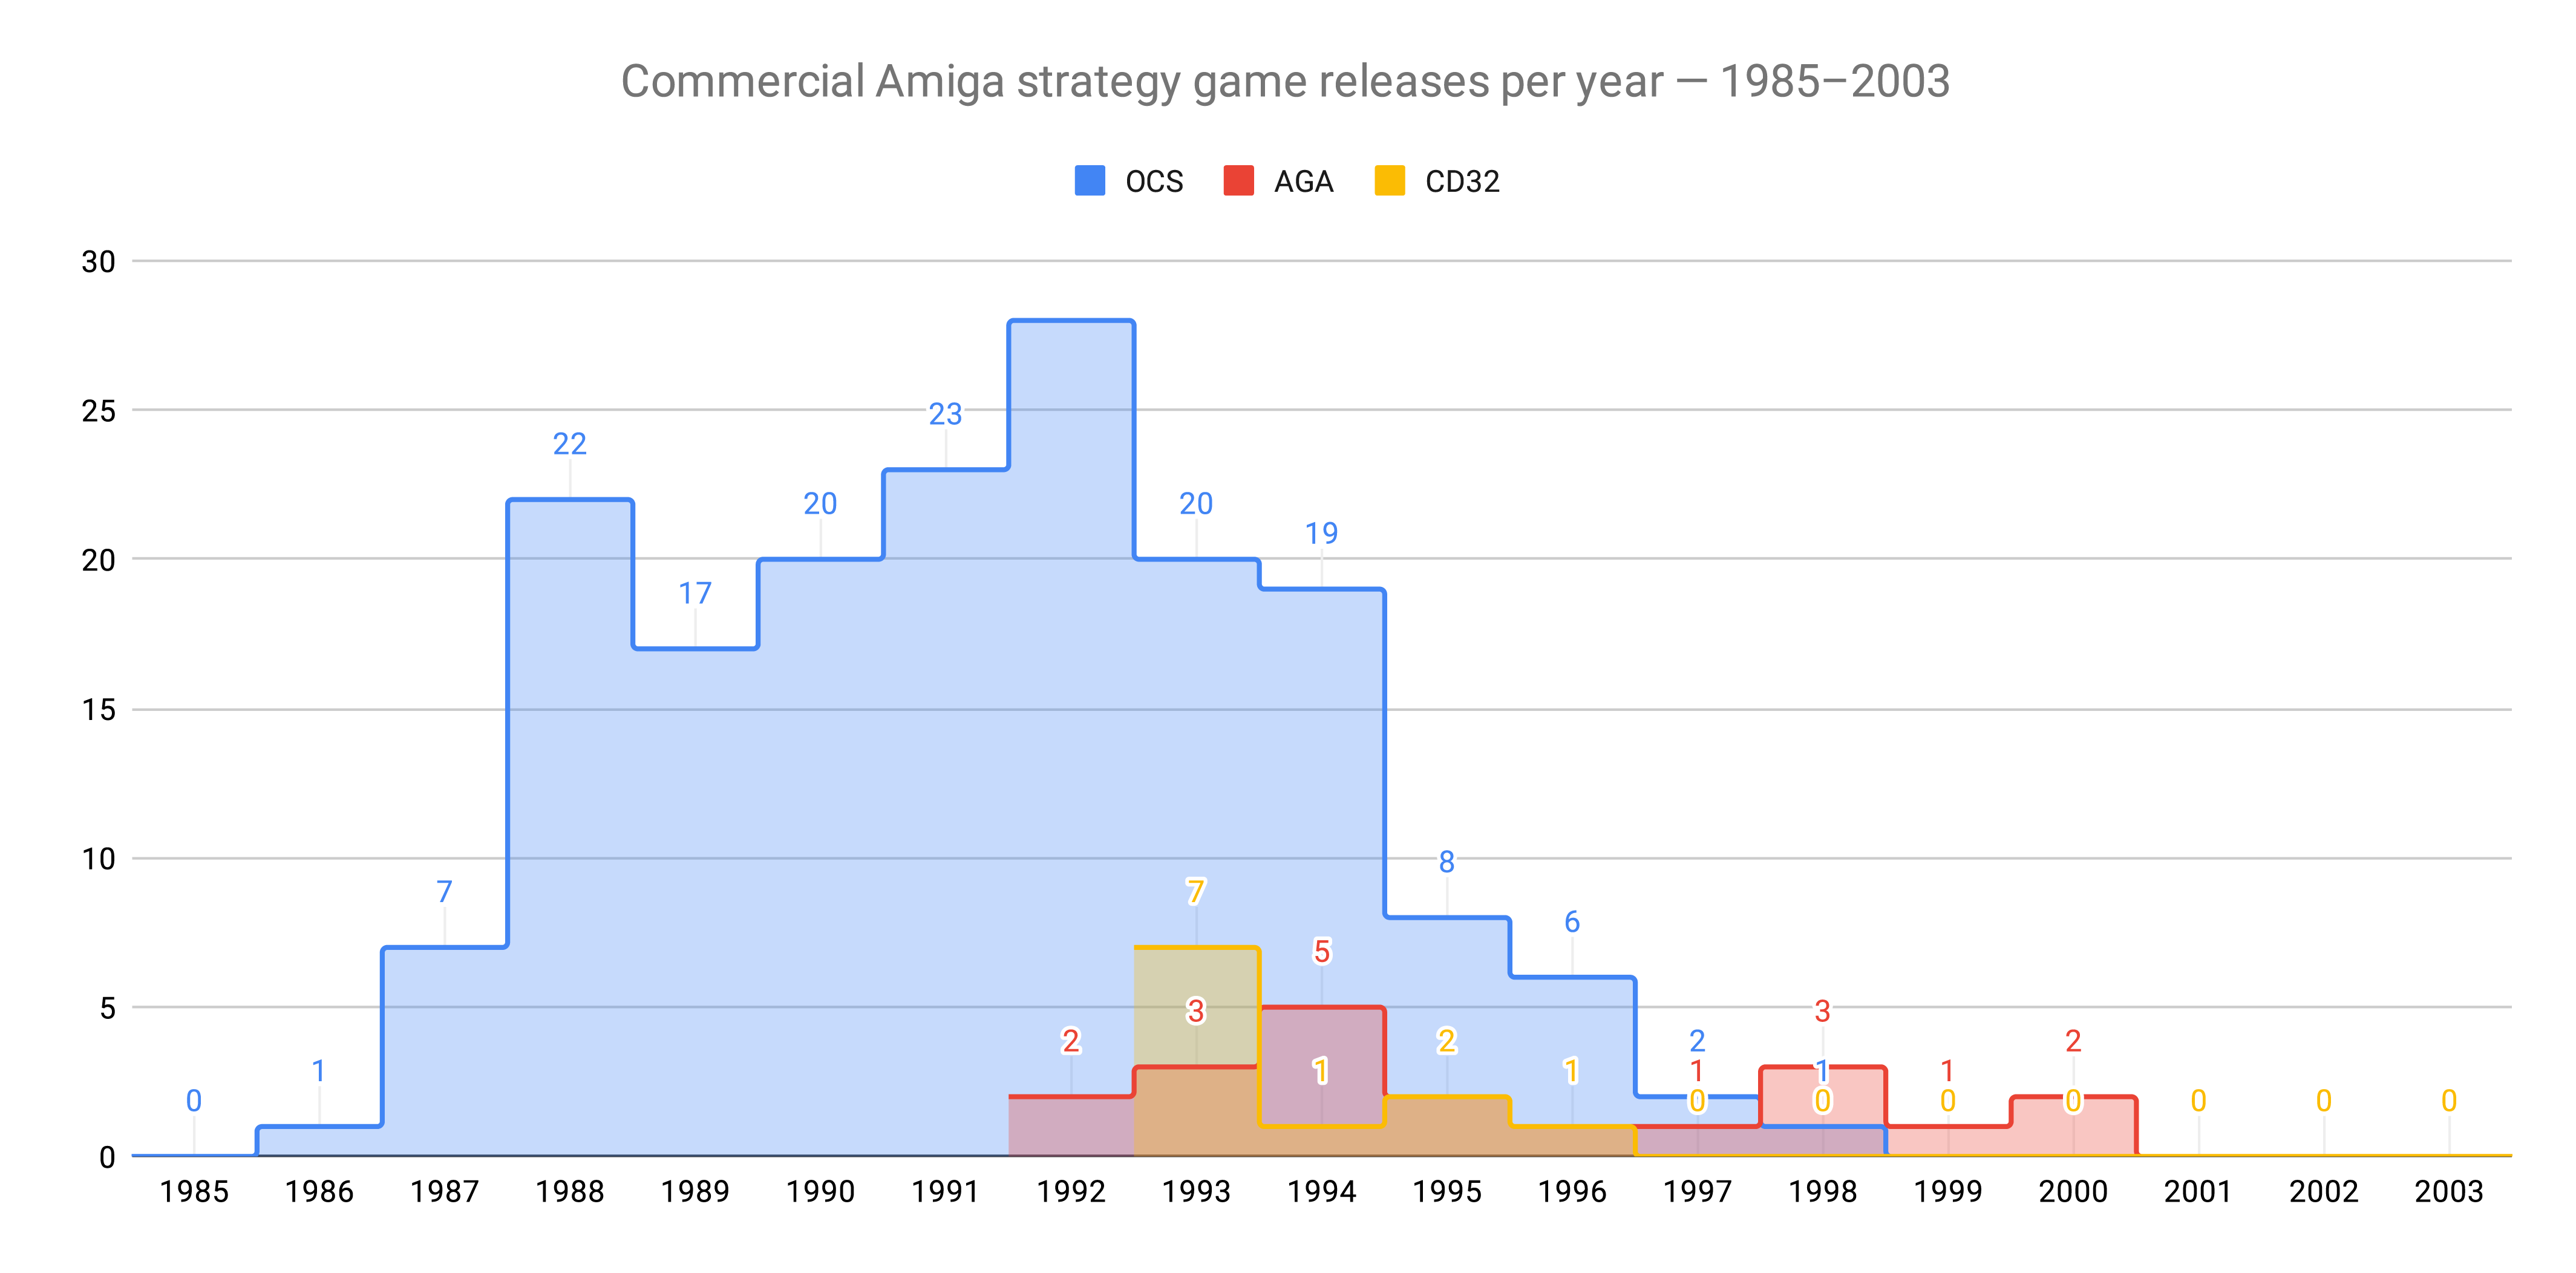 Commercial Amiga strategy releases per year between 1985-2003